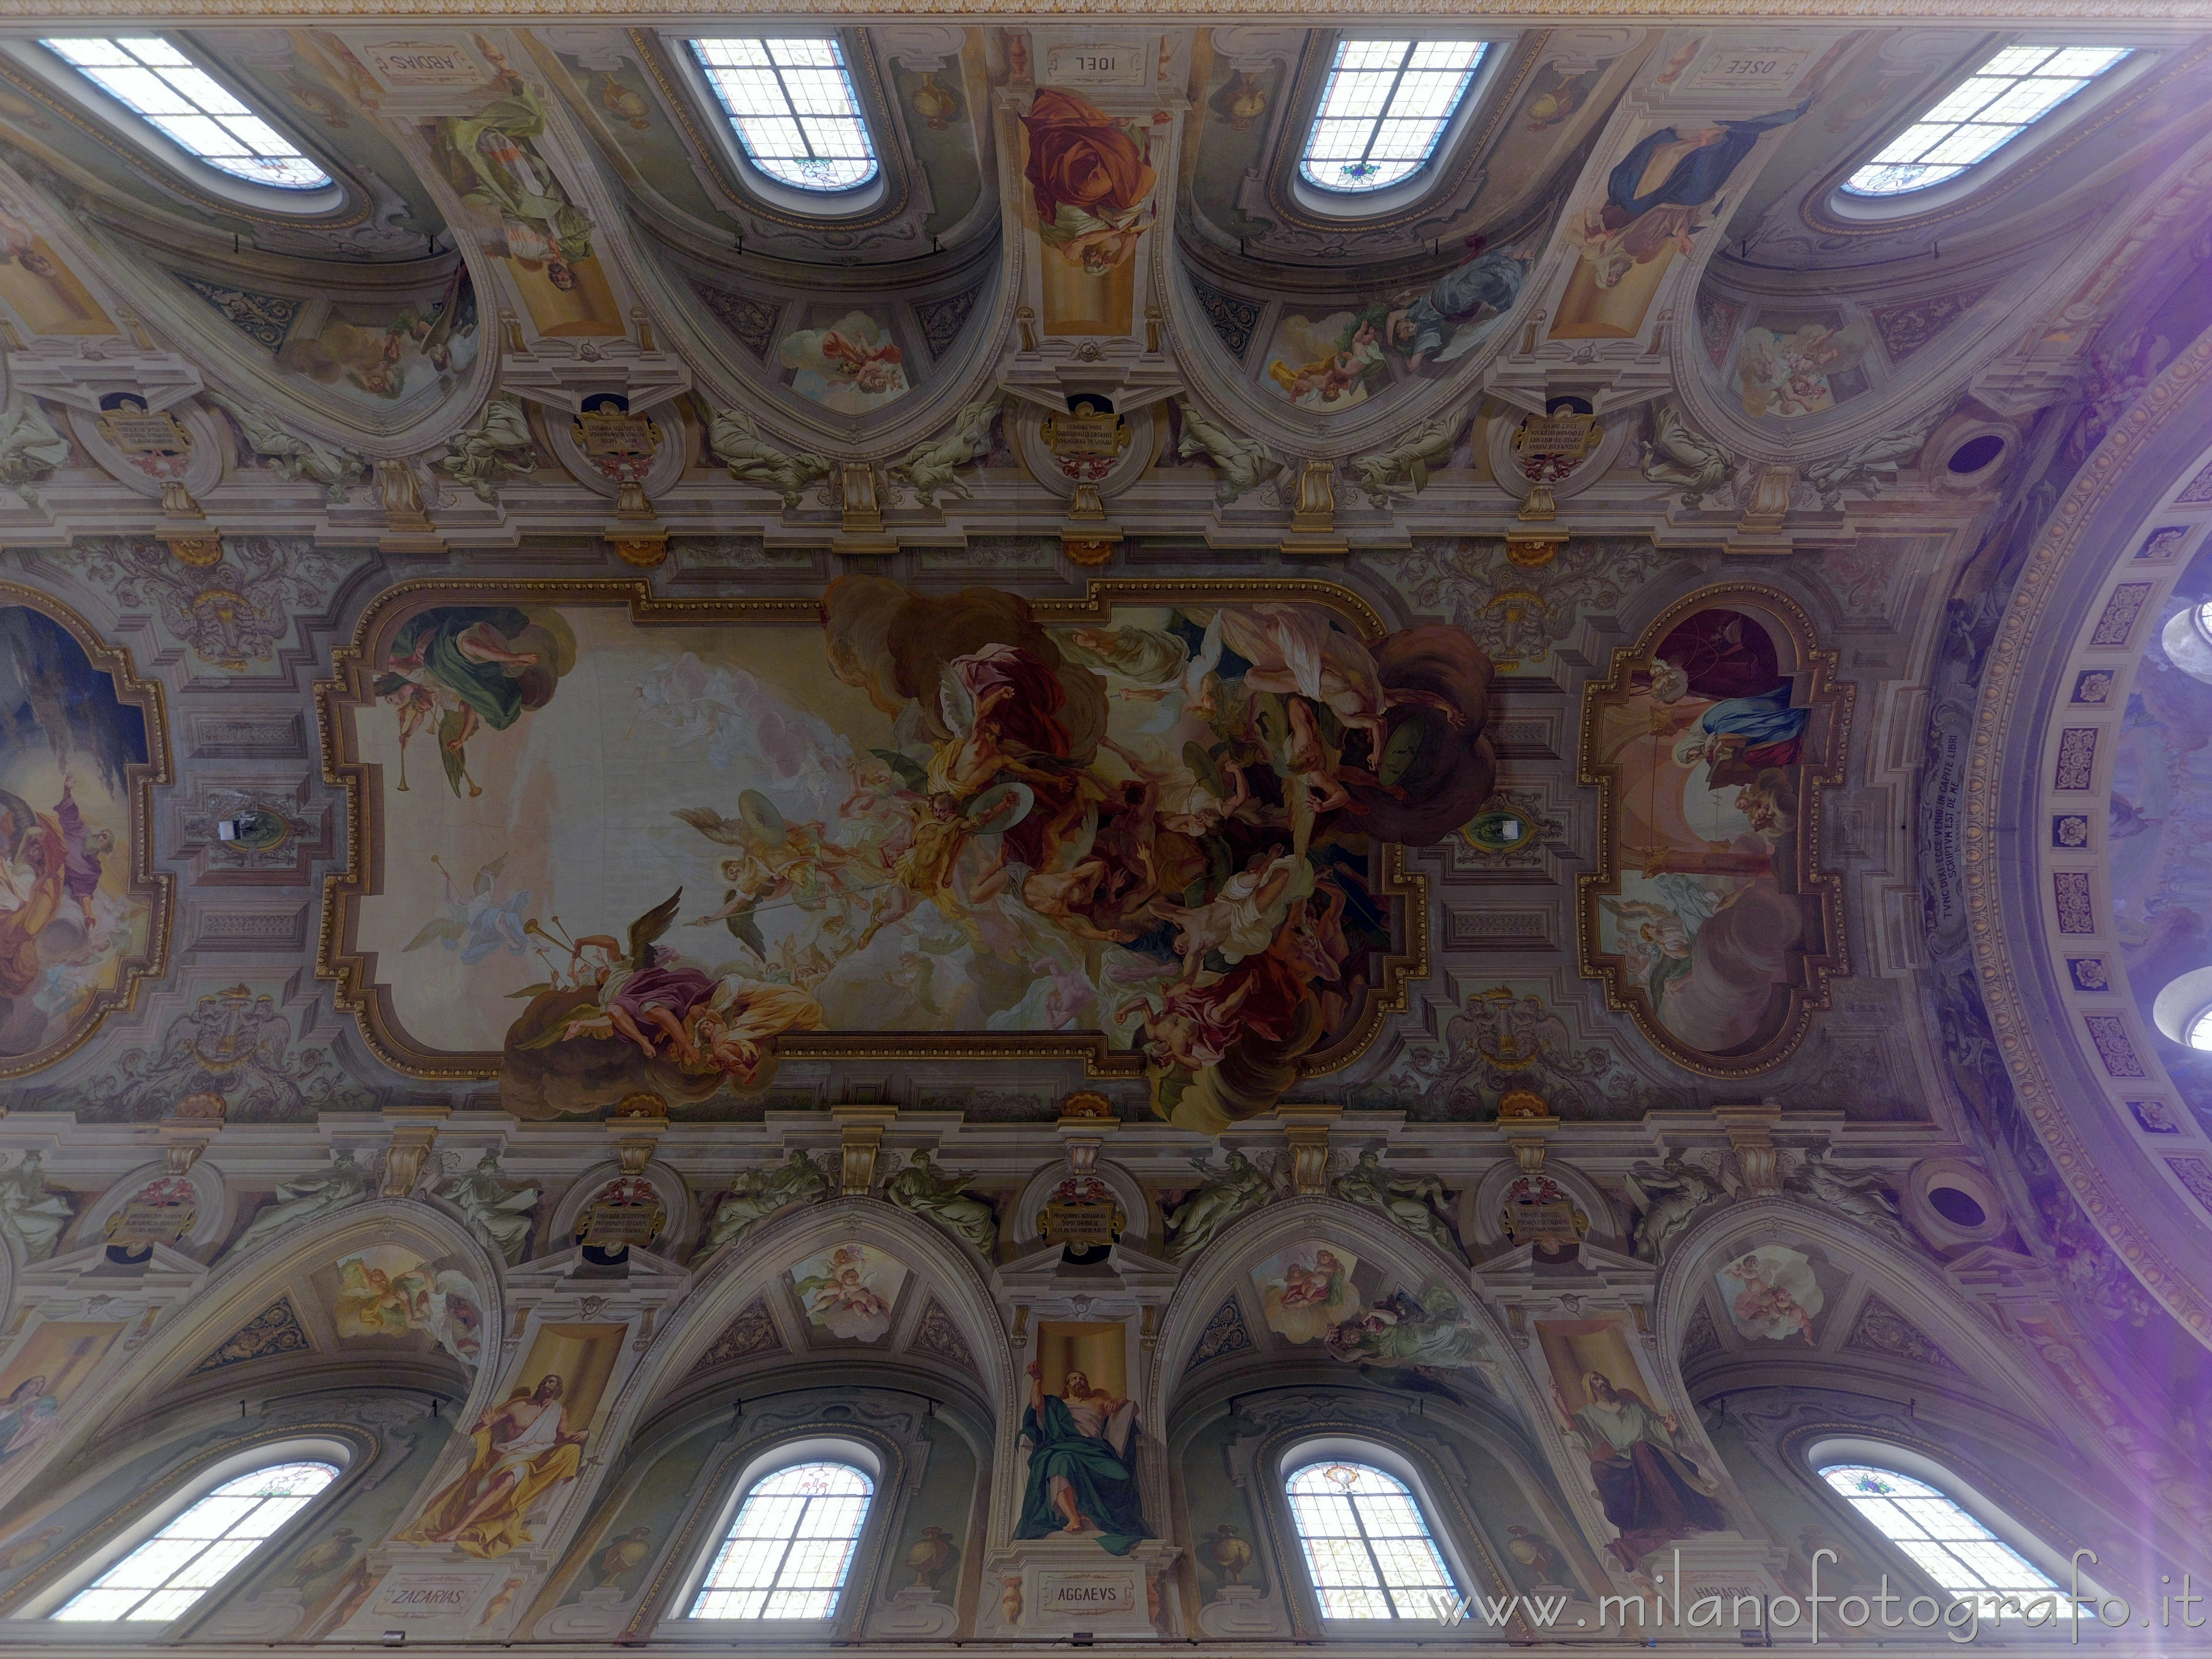 Busto Arsizio (Varese, Italy): Ceiling of the nave of the St. Michael the Archangel Church - Busto Arsizio (Varese, Italy)